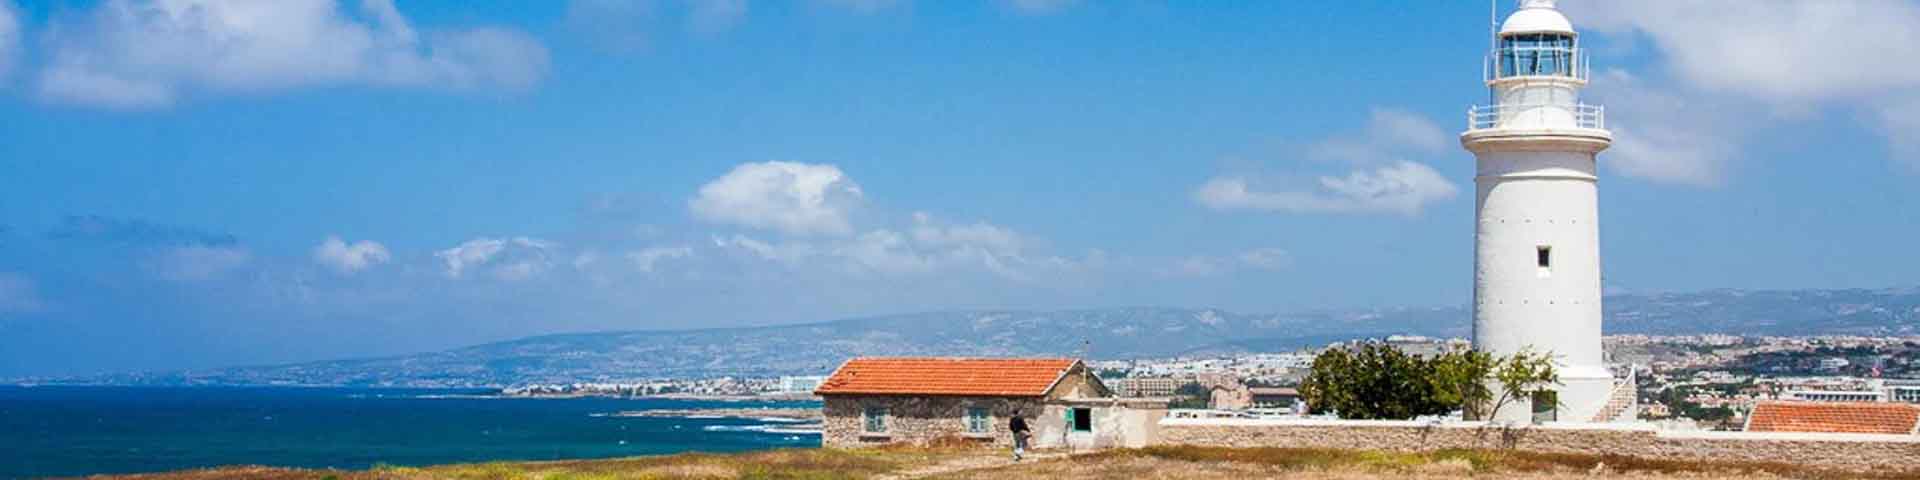 The Lighthouse in Kato Paphos